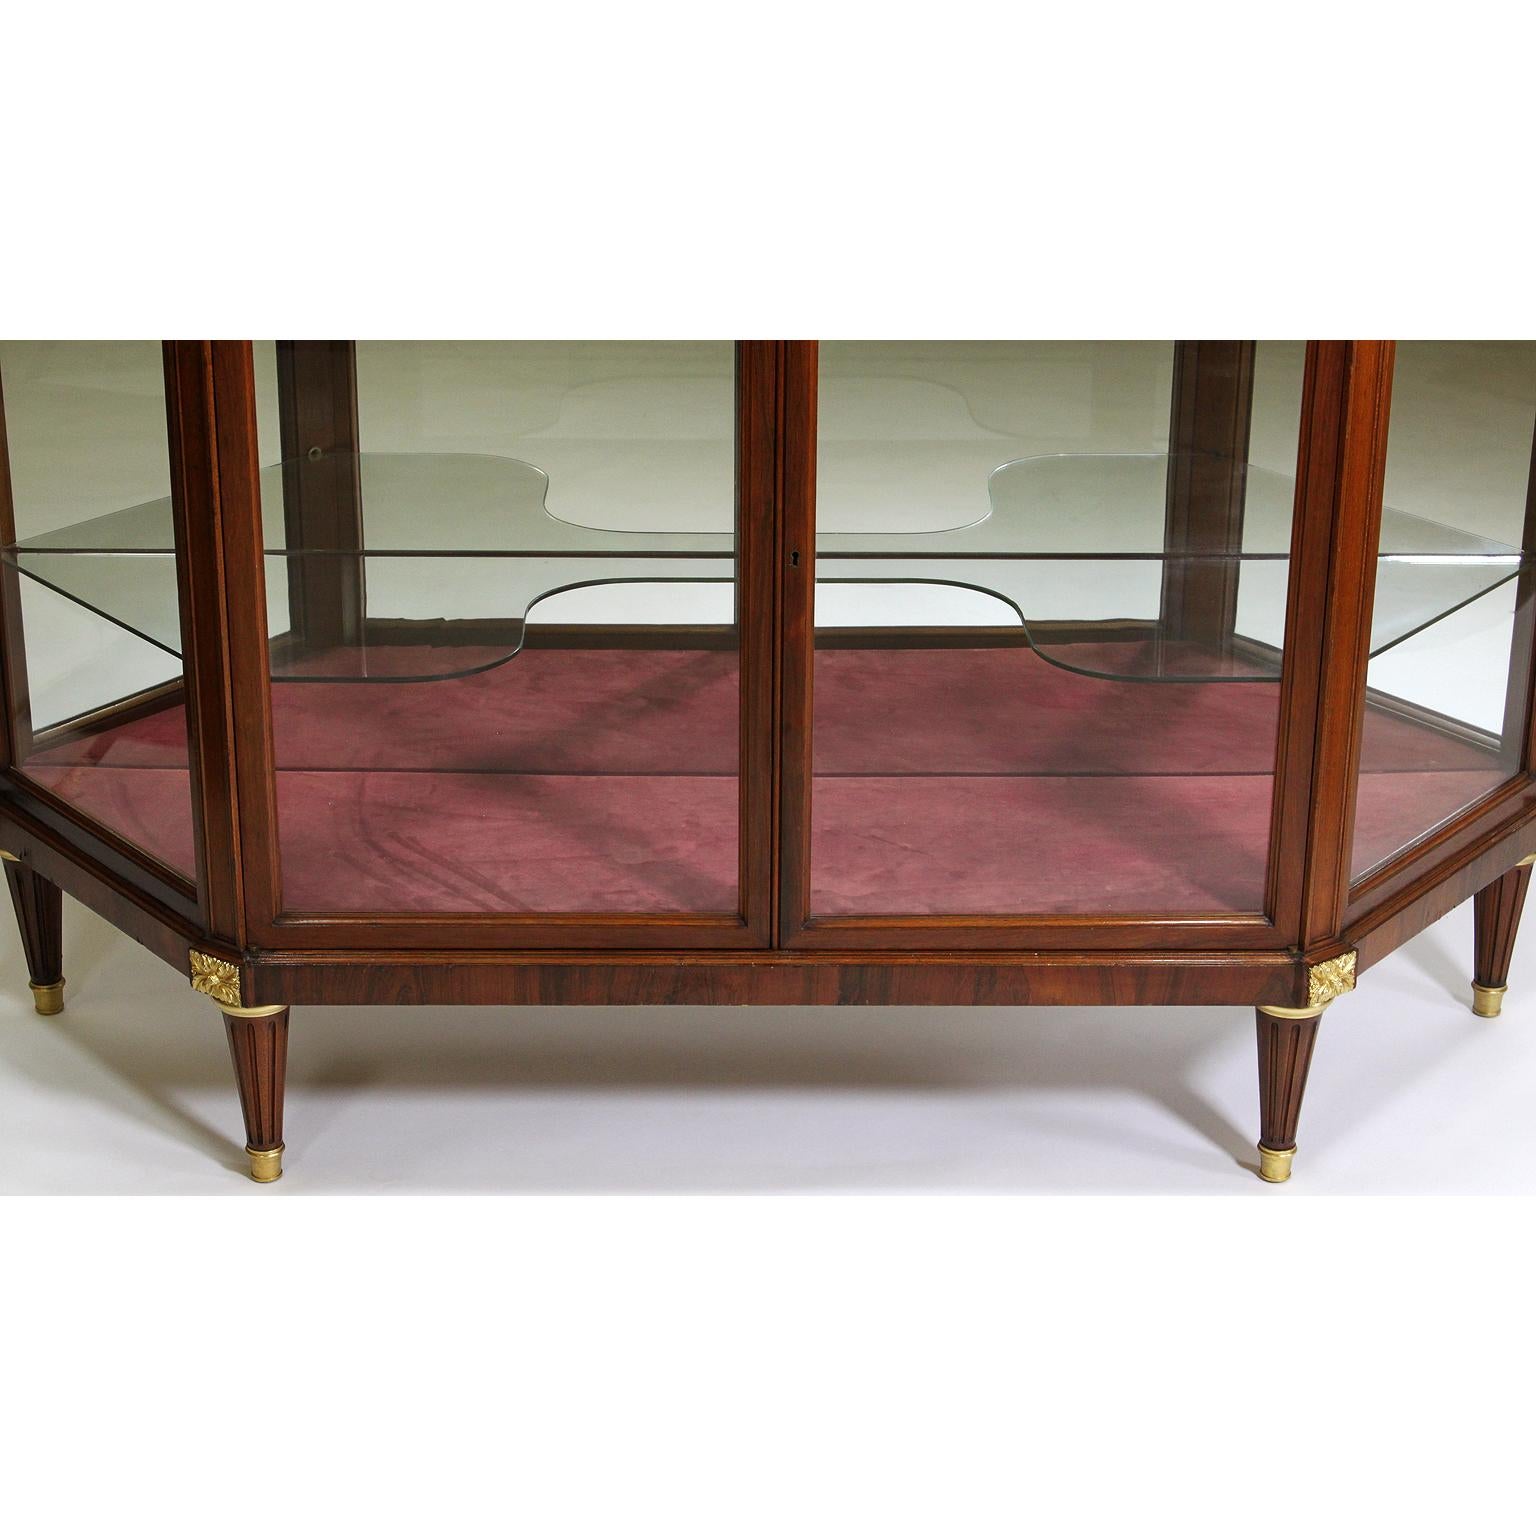 French Louis XVI Style Mahogany and Gilt-Bronze Mounted Sever Exhibition Vitrine In Good Condition For Sale In Los Angeles, CA